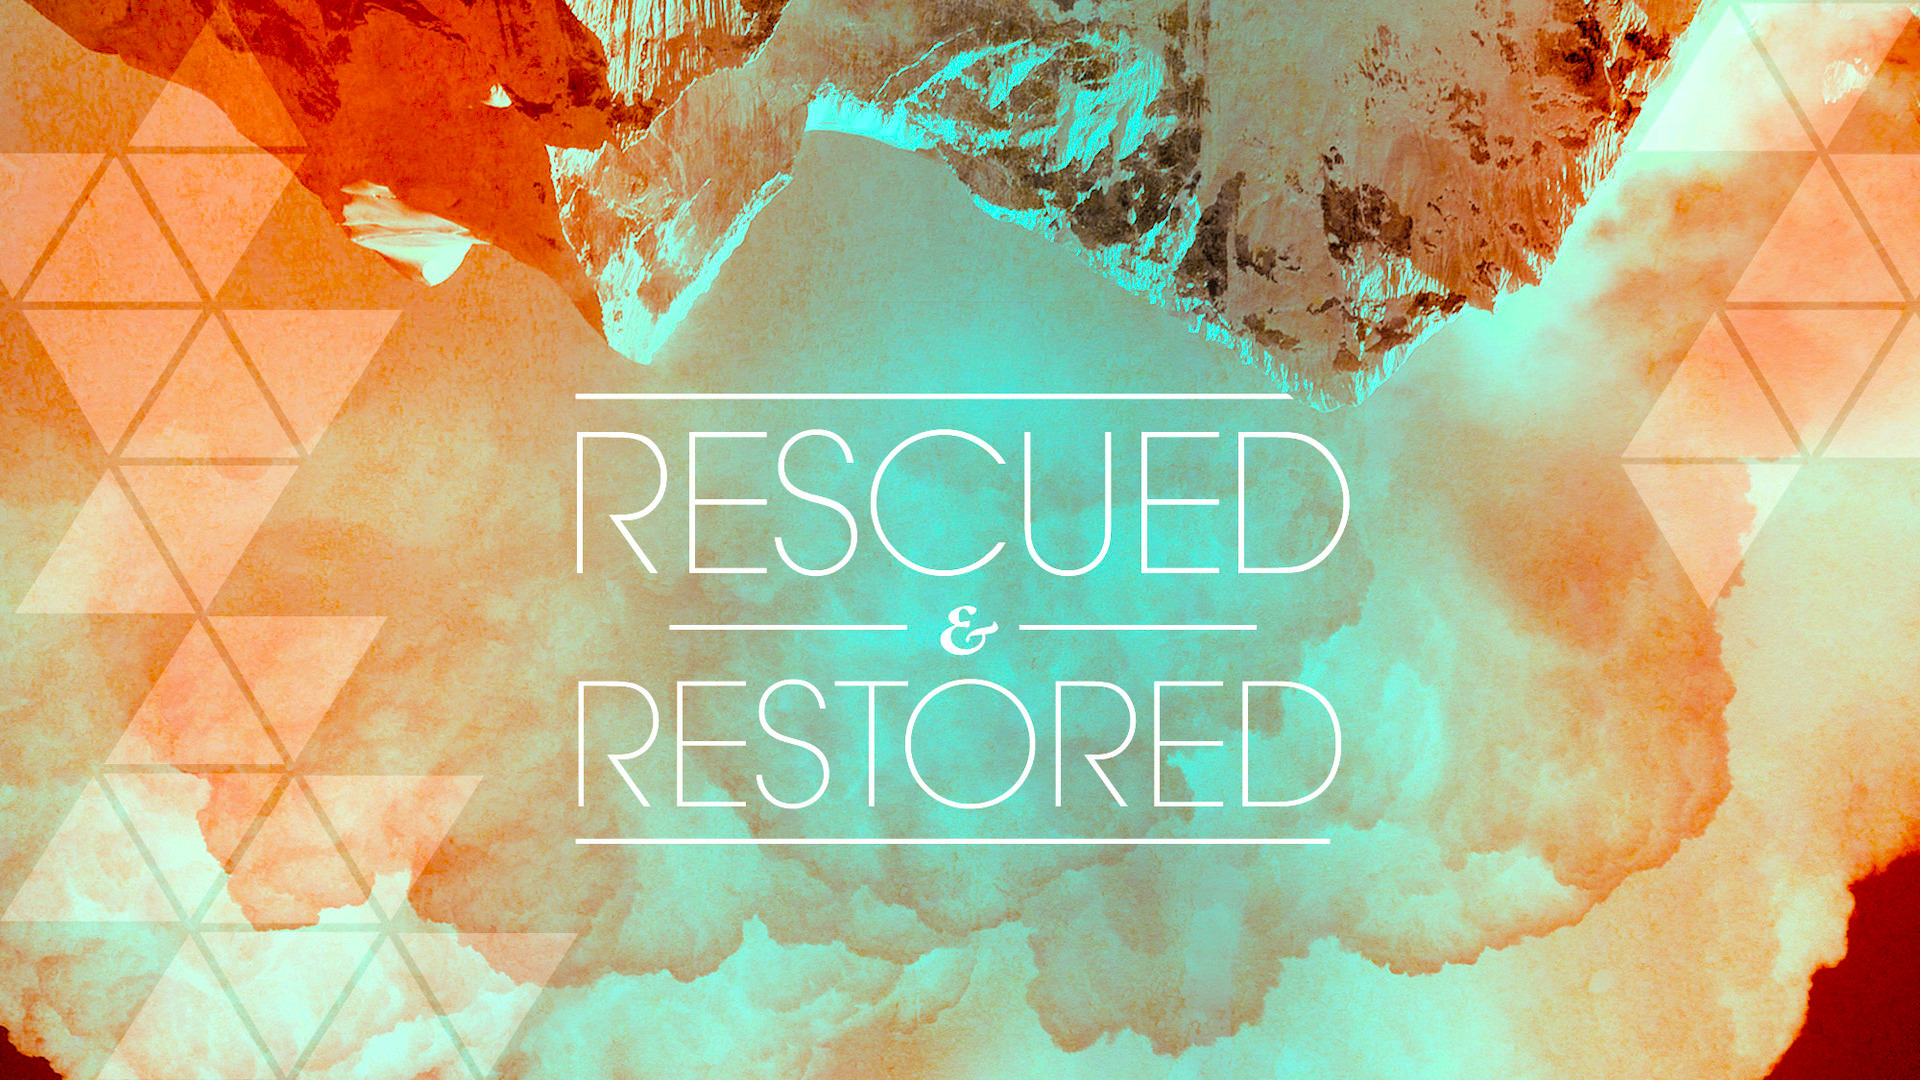 04-17-16 | Rescued and Restored | The Power of the Gospel | Mark Anderson